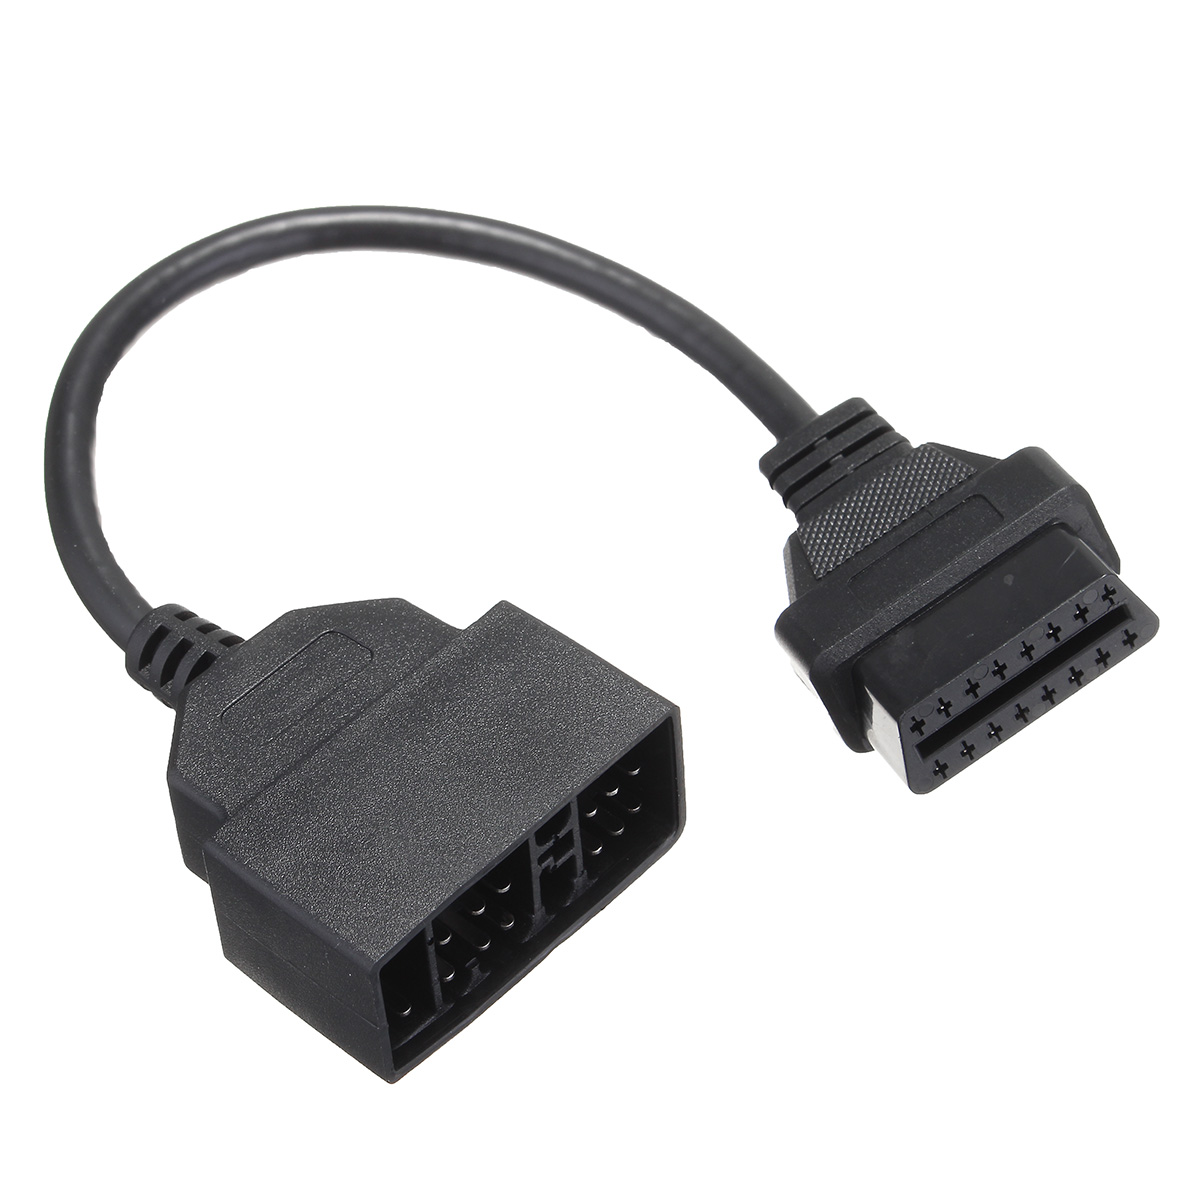 22 Pin OBD1 to 16 Pin OBD2 Convertor Adapter Cable for TOYOTA Diagnostic Scanner - Auto GoShop